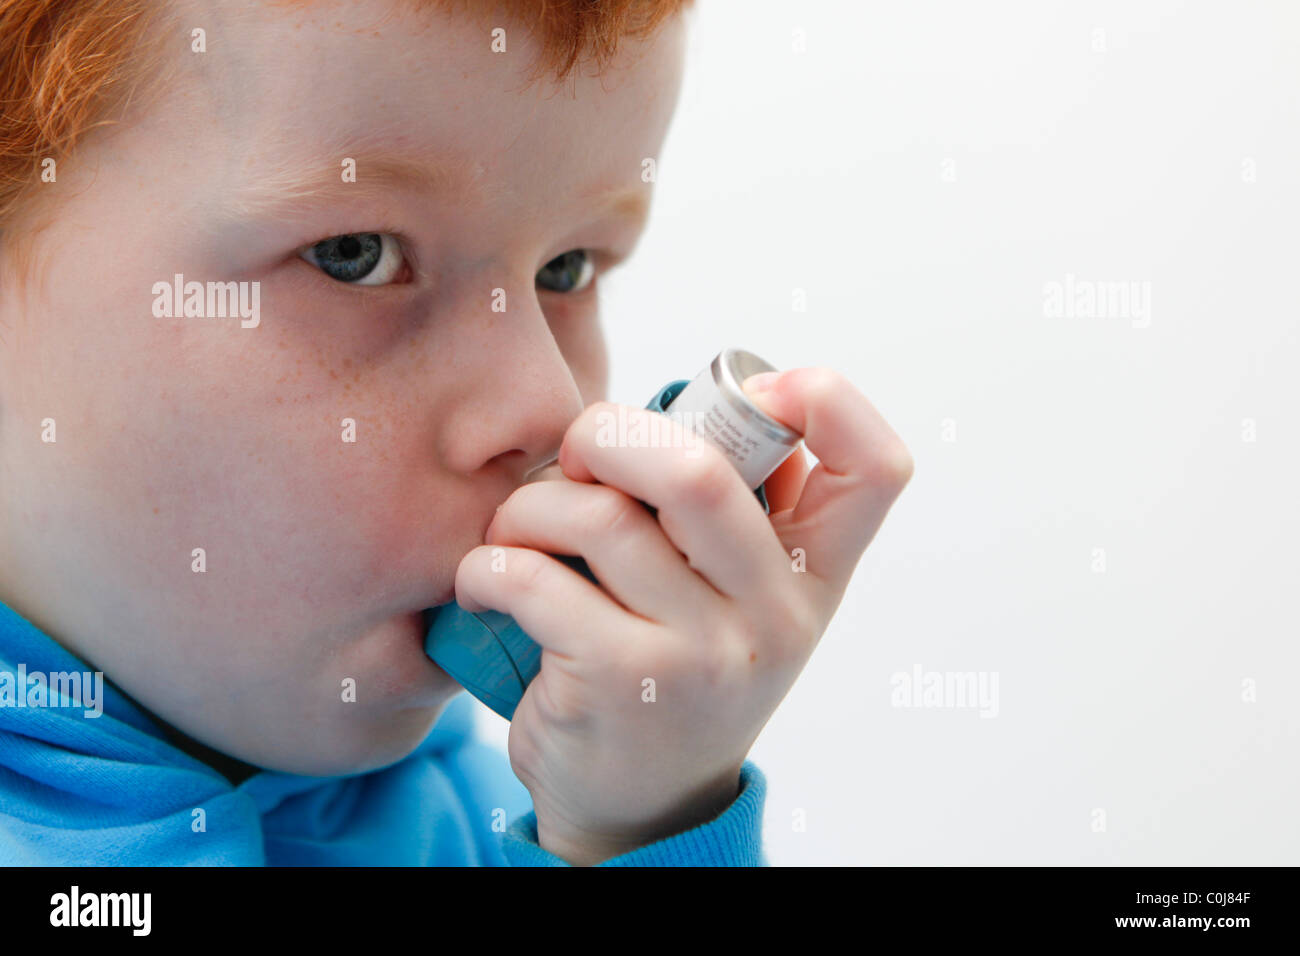 Little boy using his asthma inhaler to alleviate symptoms. Stock Photo